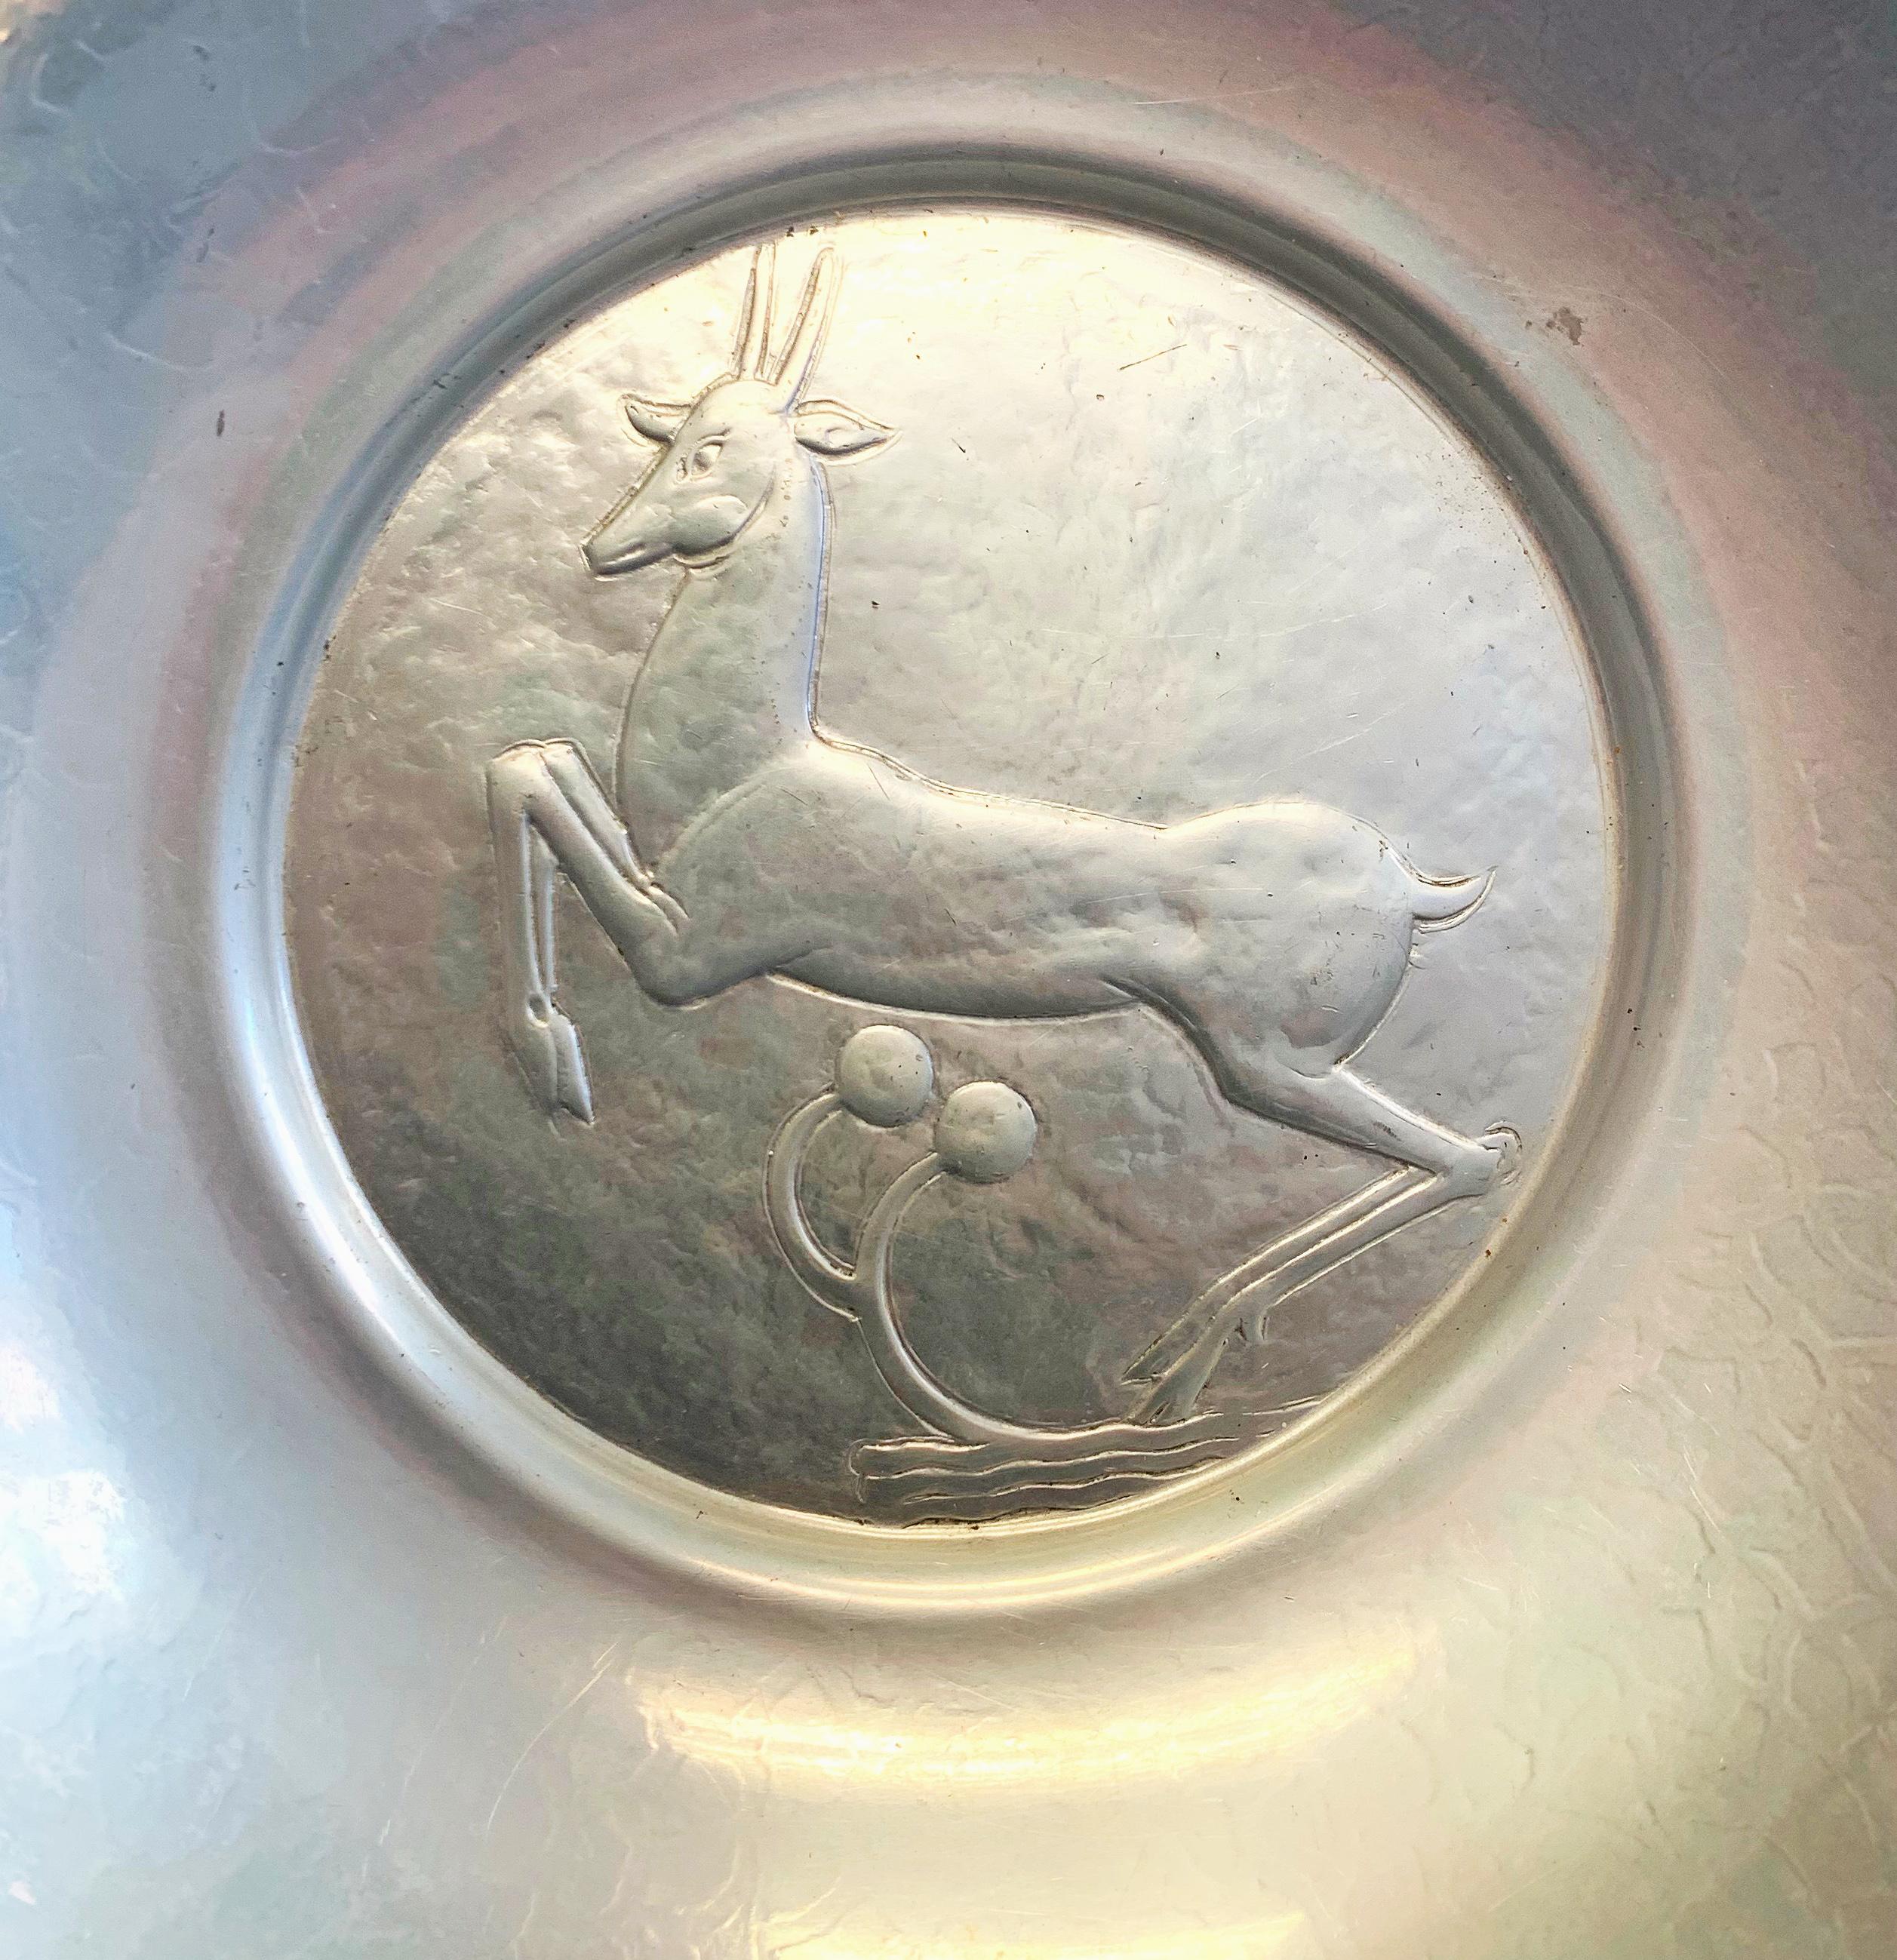 One of the most iconic, though rare, pieces ever made by Oscar Bach, this bowl features an iconic leaping stag in high Art Deco style, executed in a silvery aluminum finished in a subtly iridescent glaze. This bowl, and a series of rare chargers in